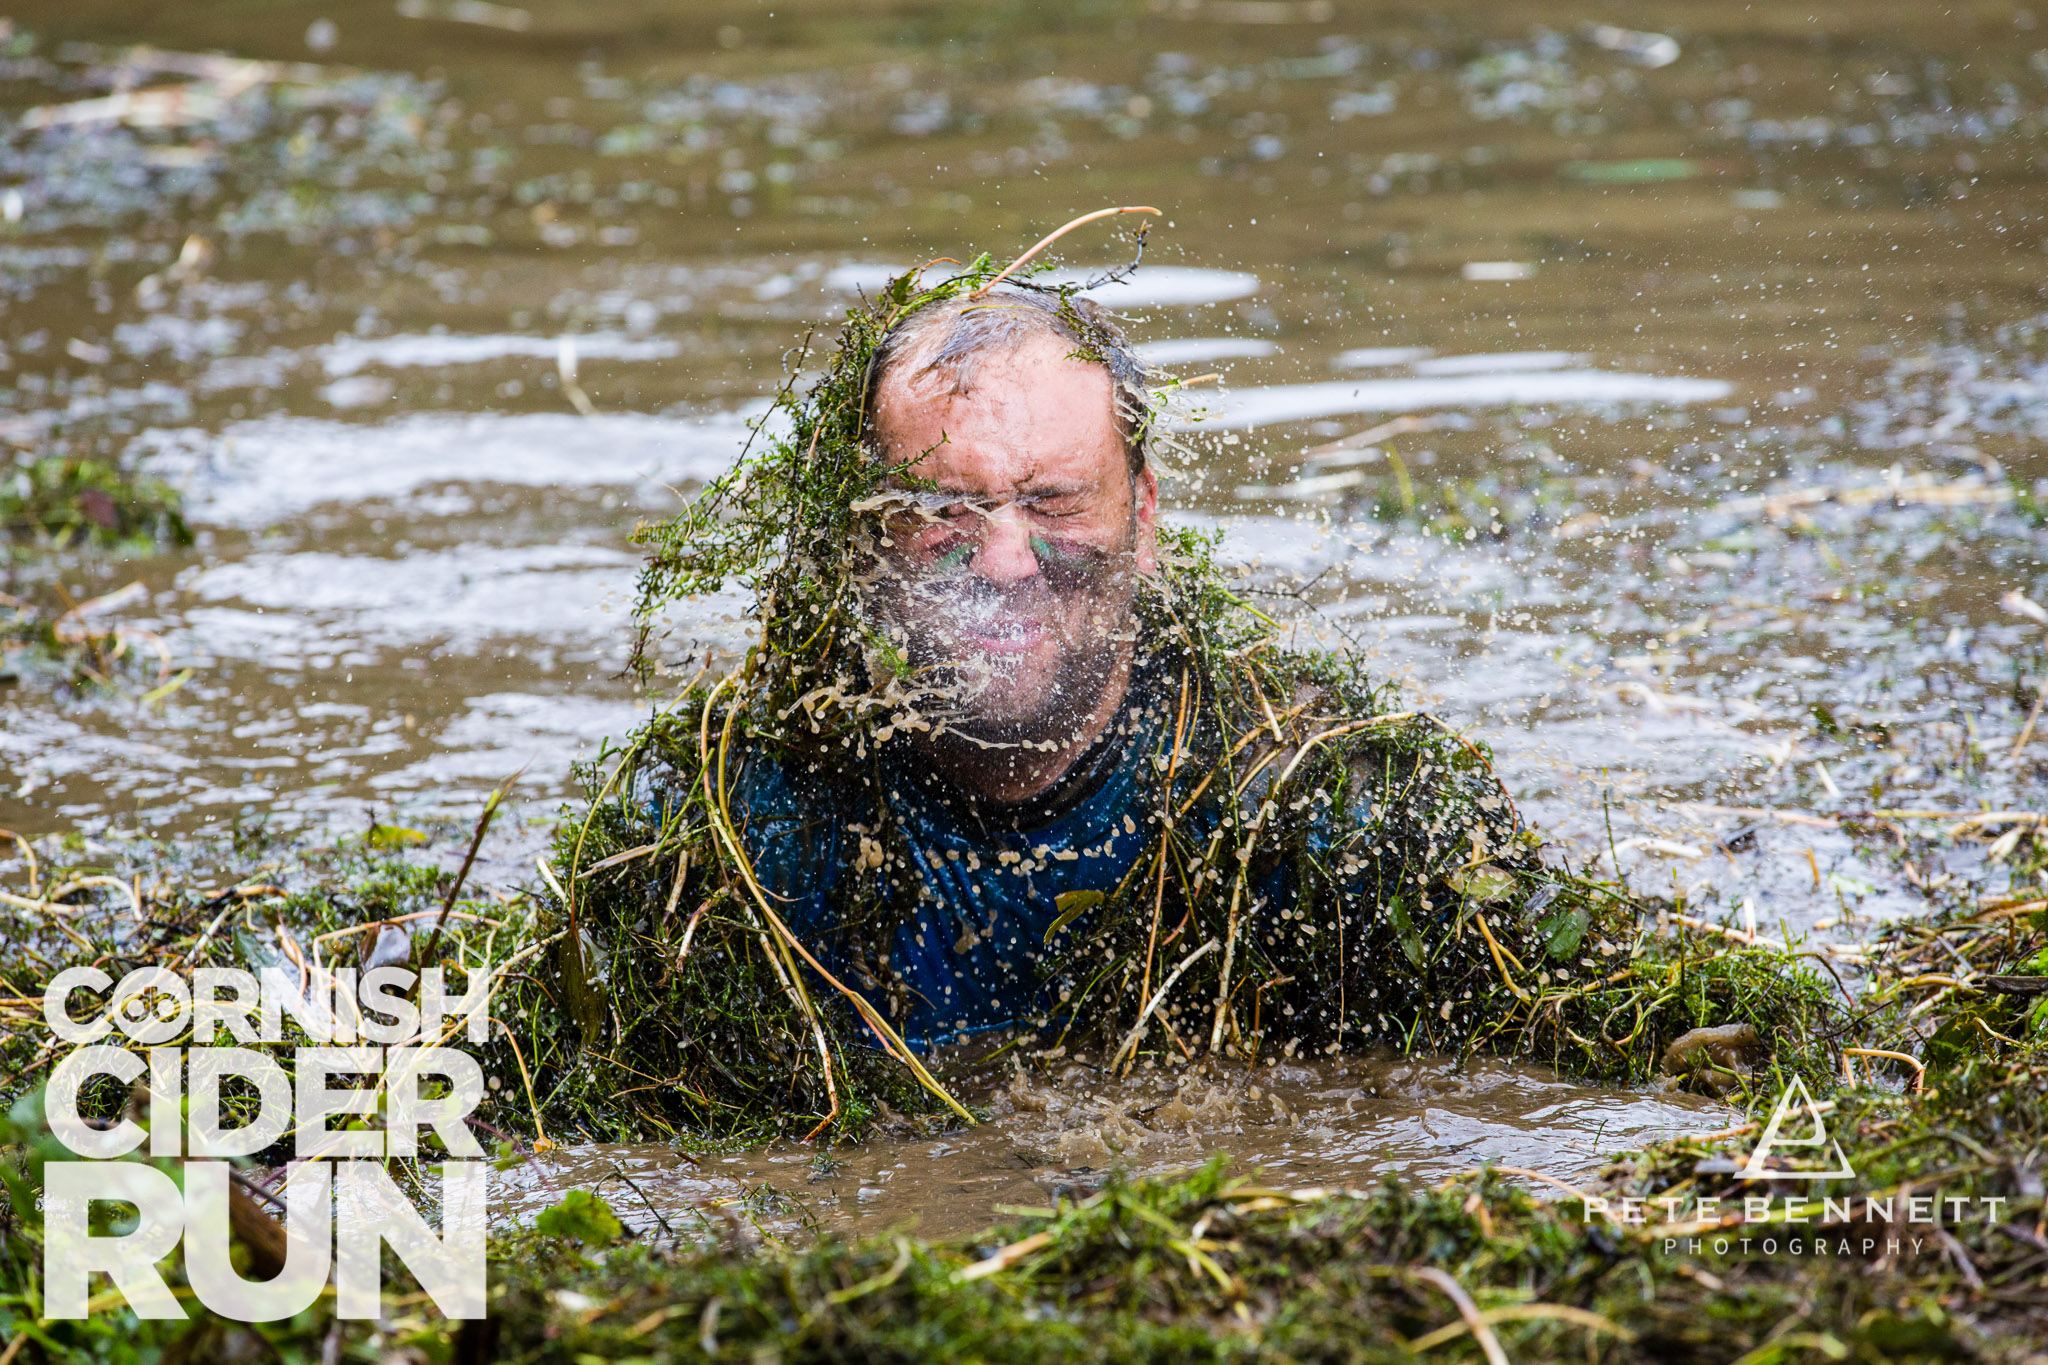 Man covered in weeds getting out of a pond in the cornish cider run 2017